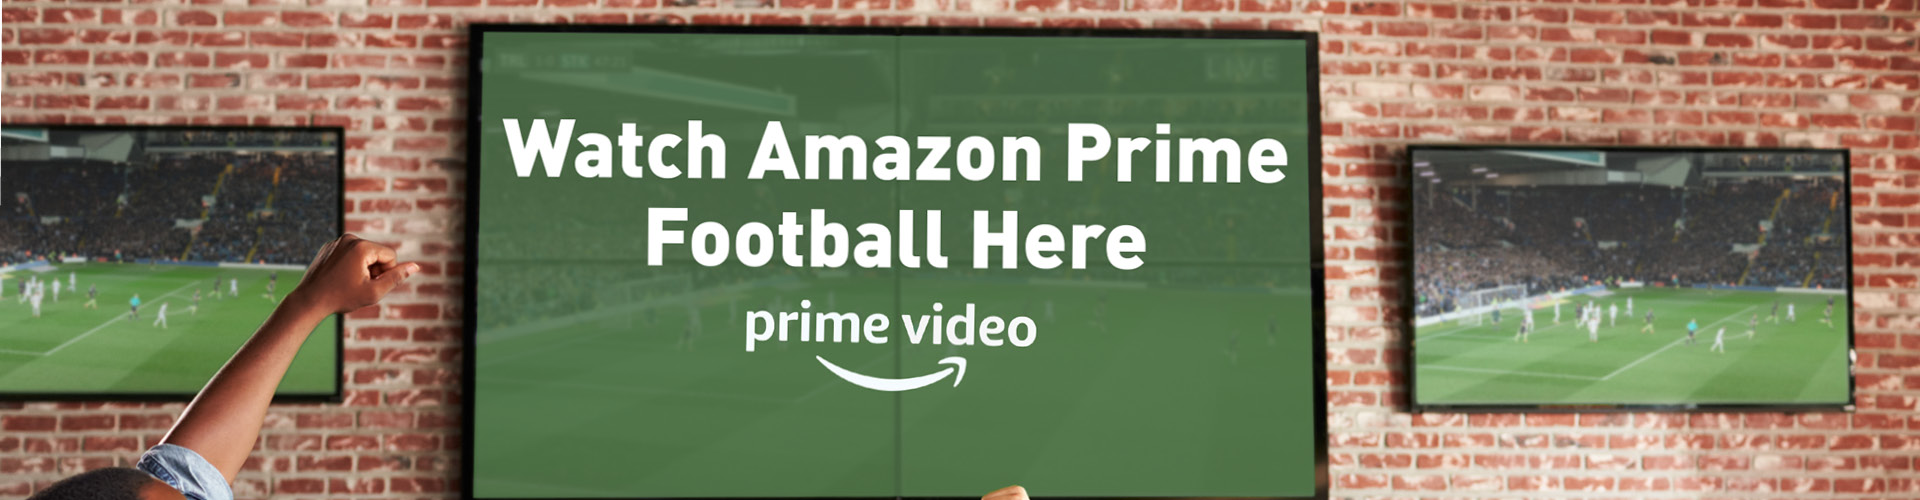 Watch Amazon Prime football at The Red Lion Hotel in Luton